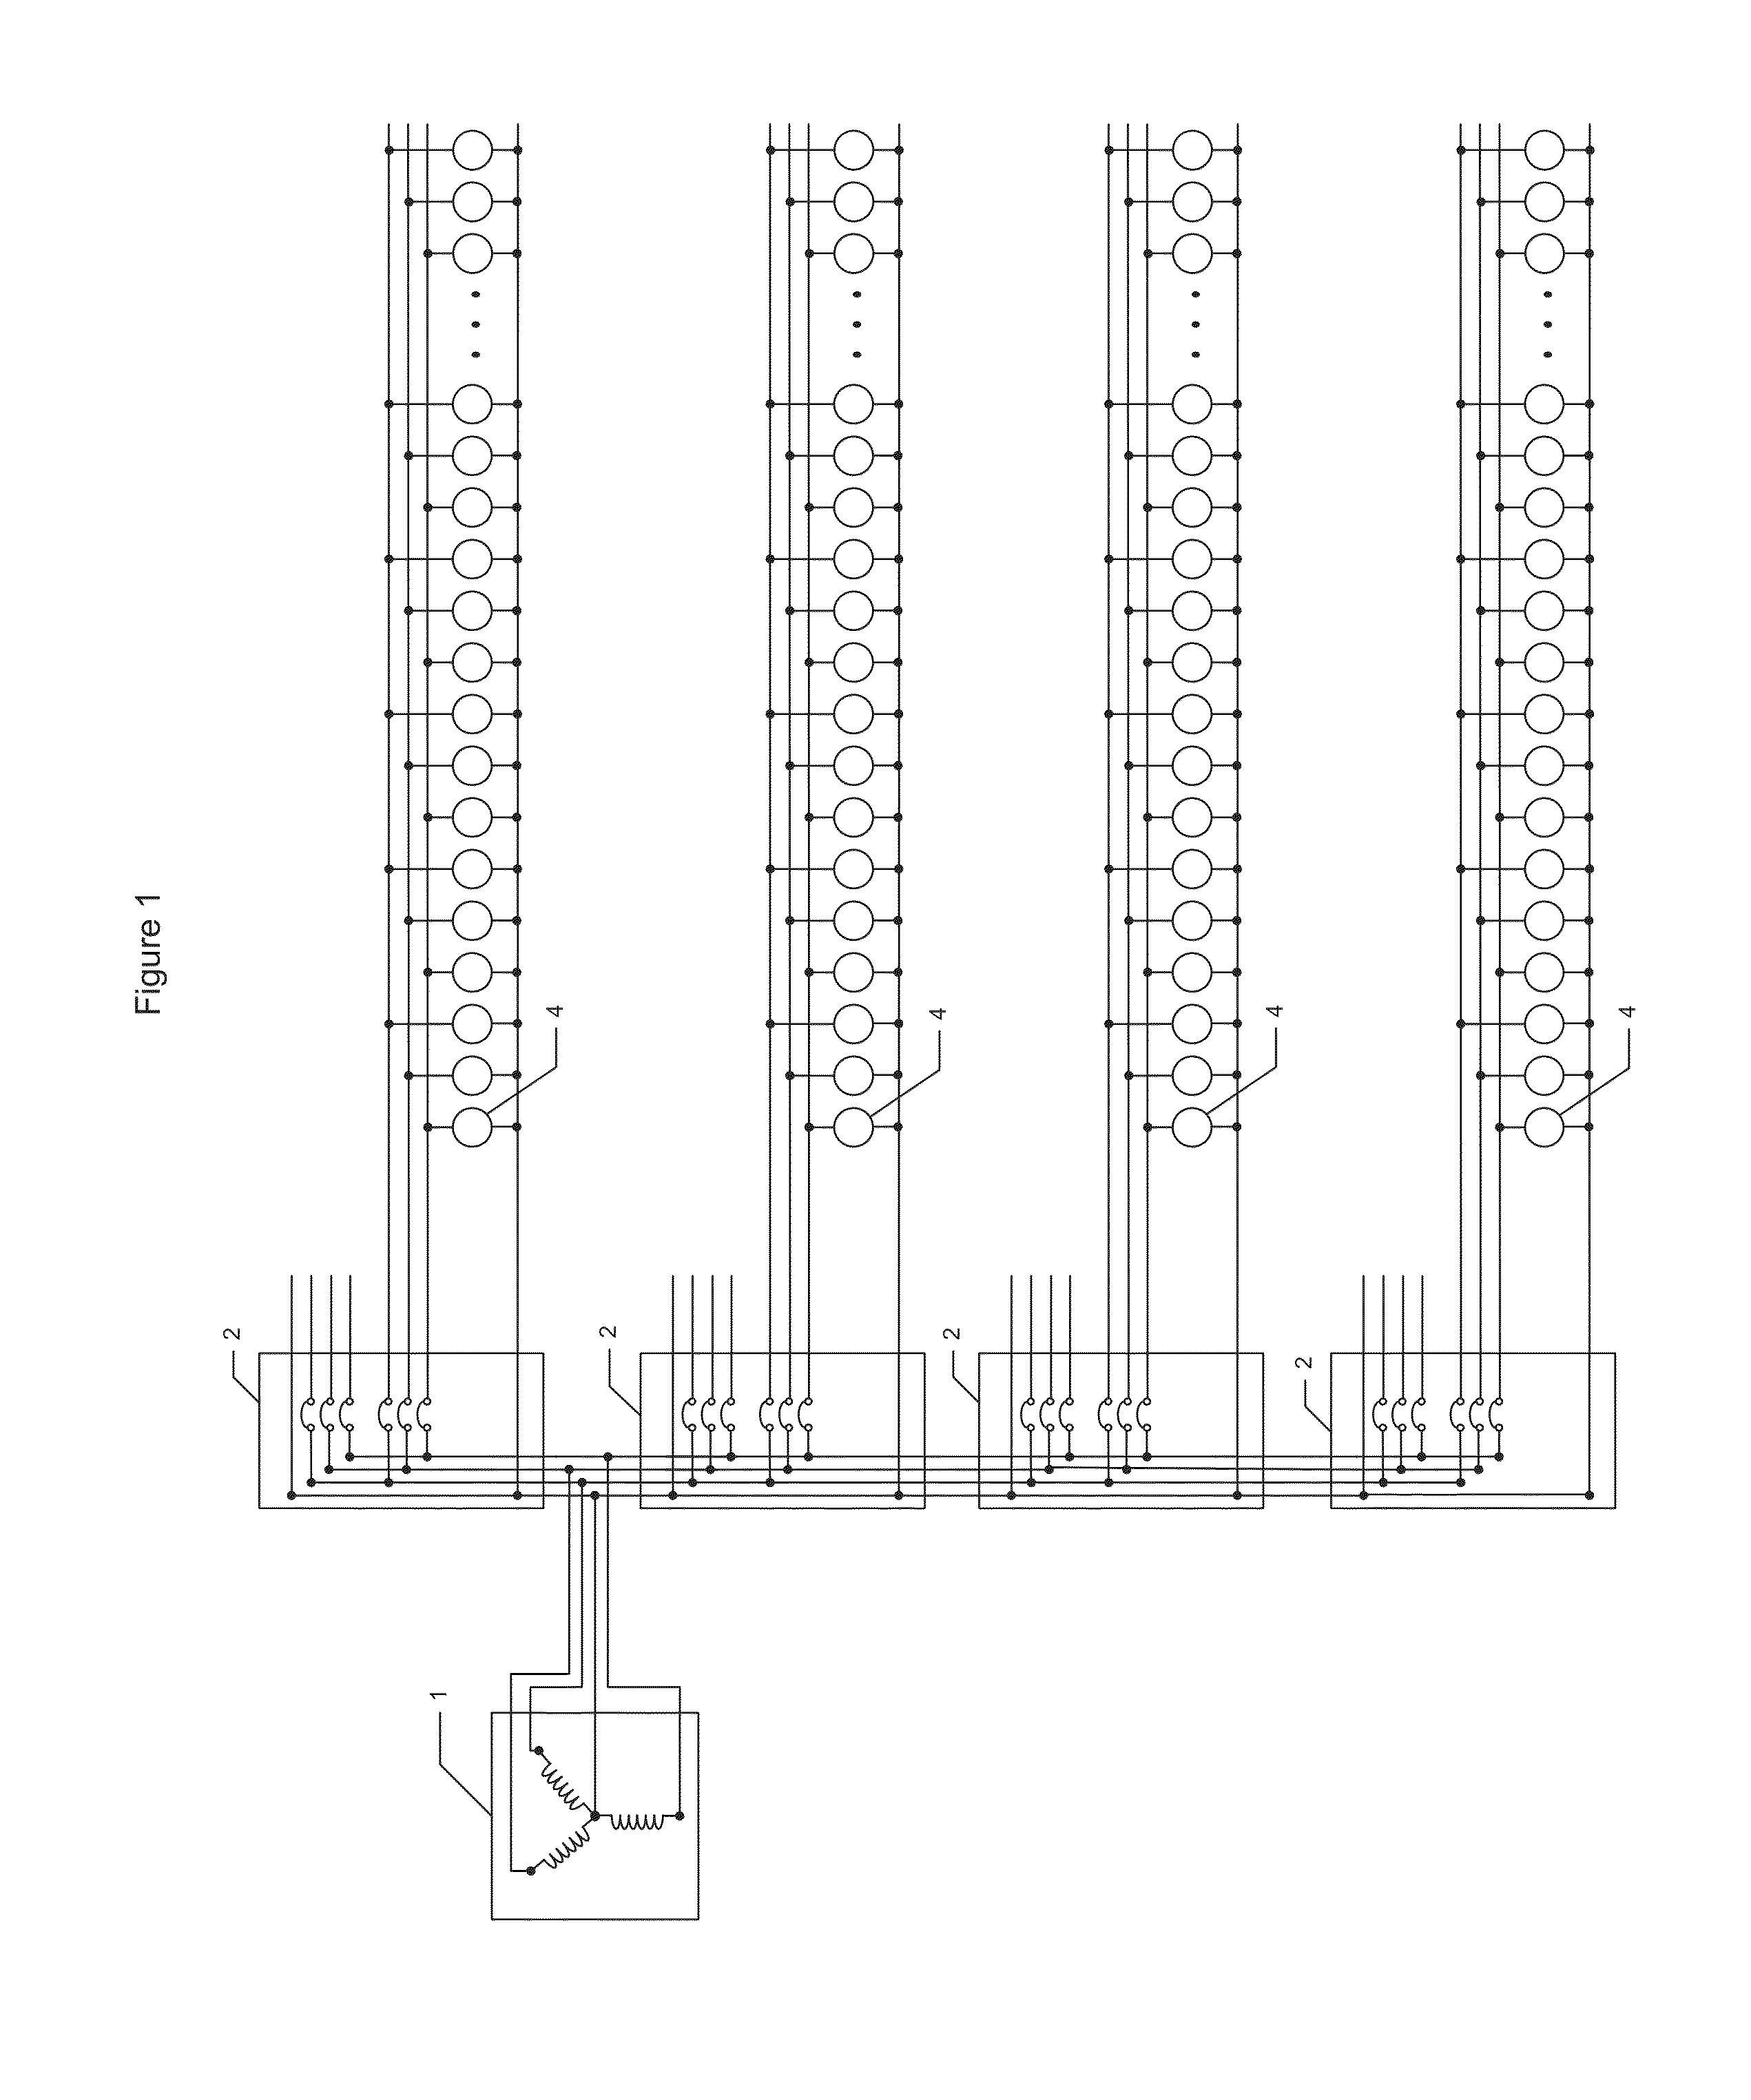 Poweline pulse position modulated three-phase transmitter apparatus and method